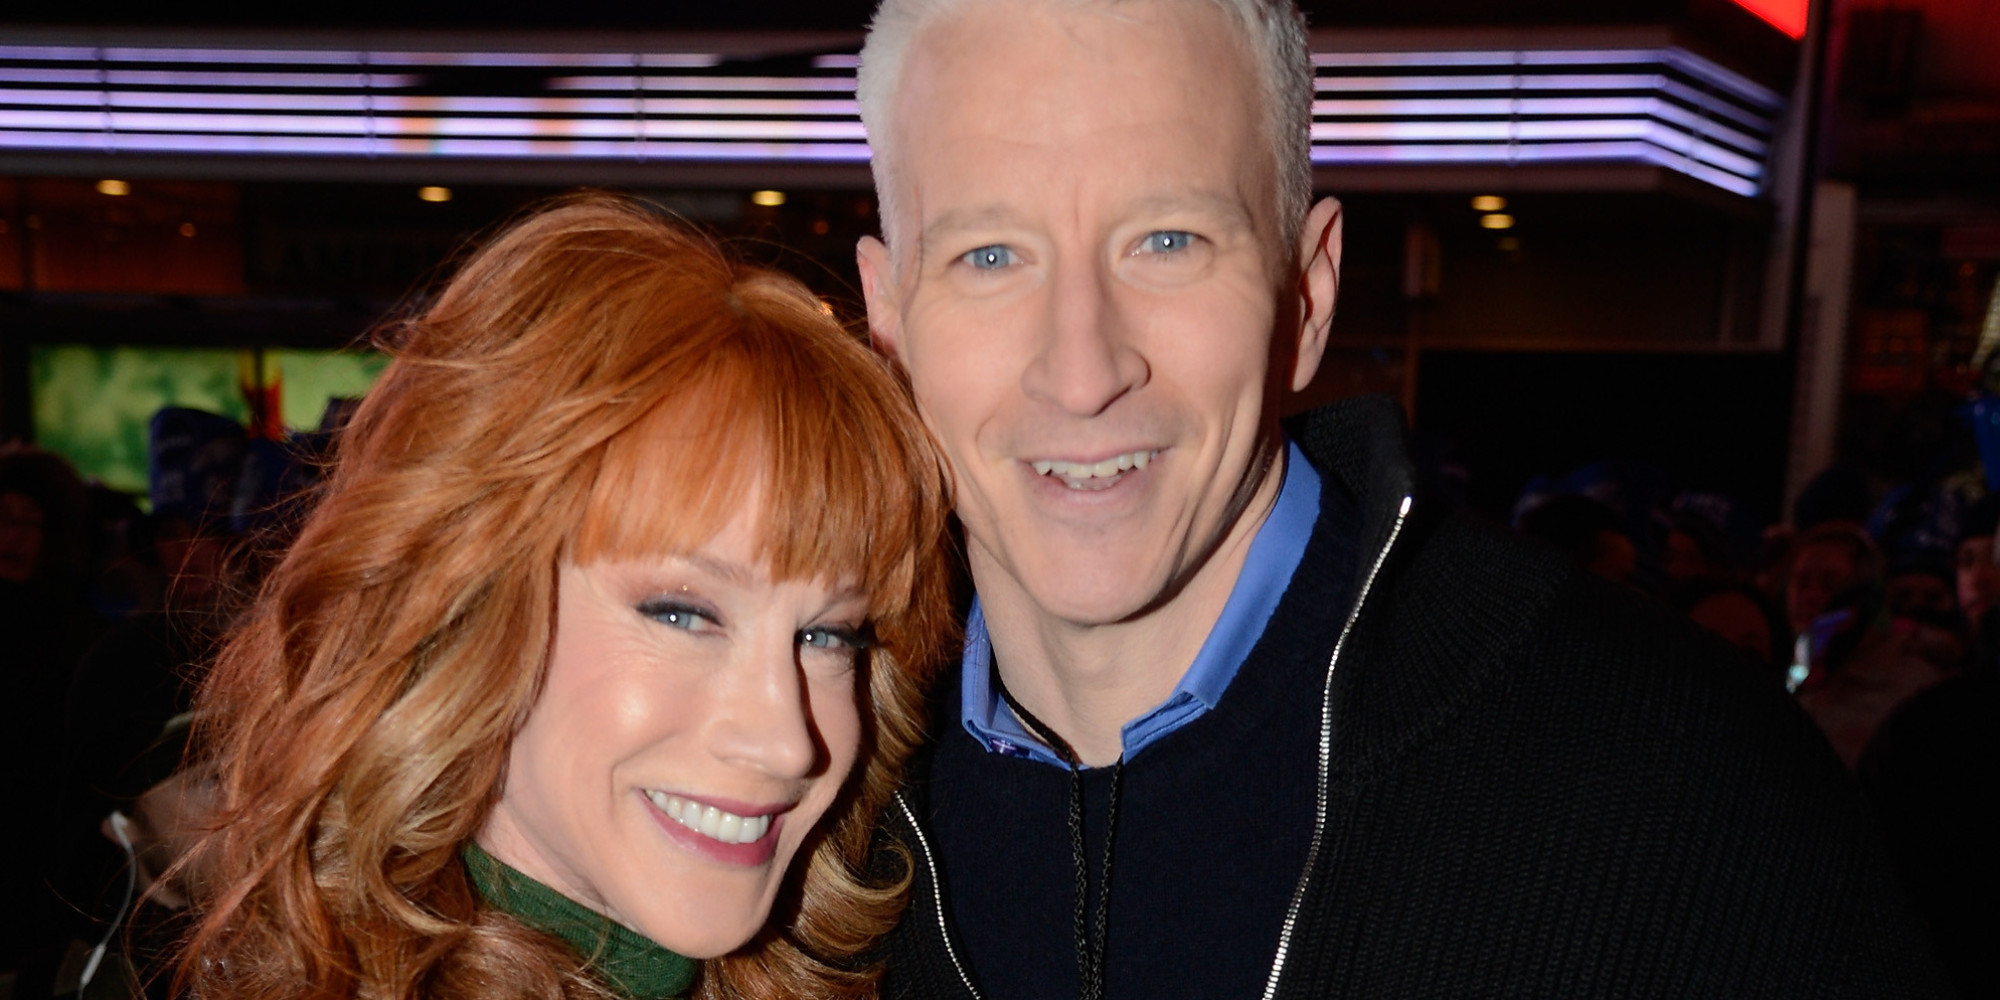 Hot pics griffin kathy Kathy Griffin